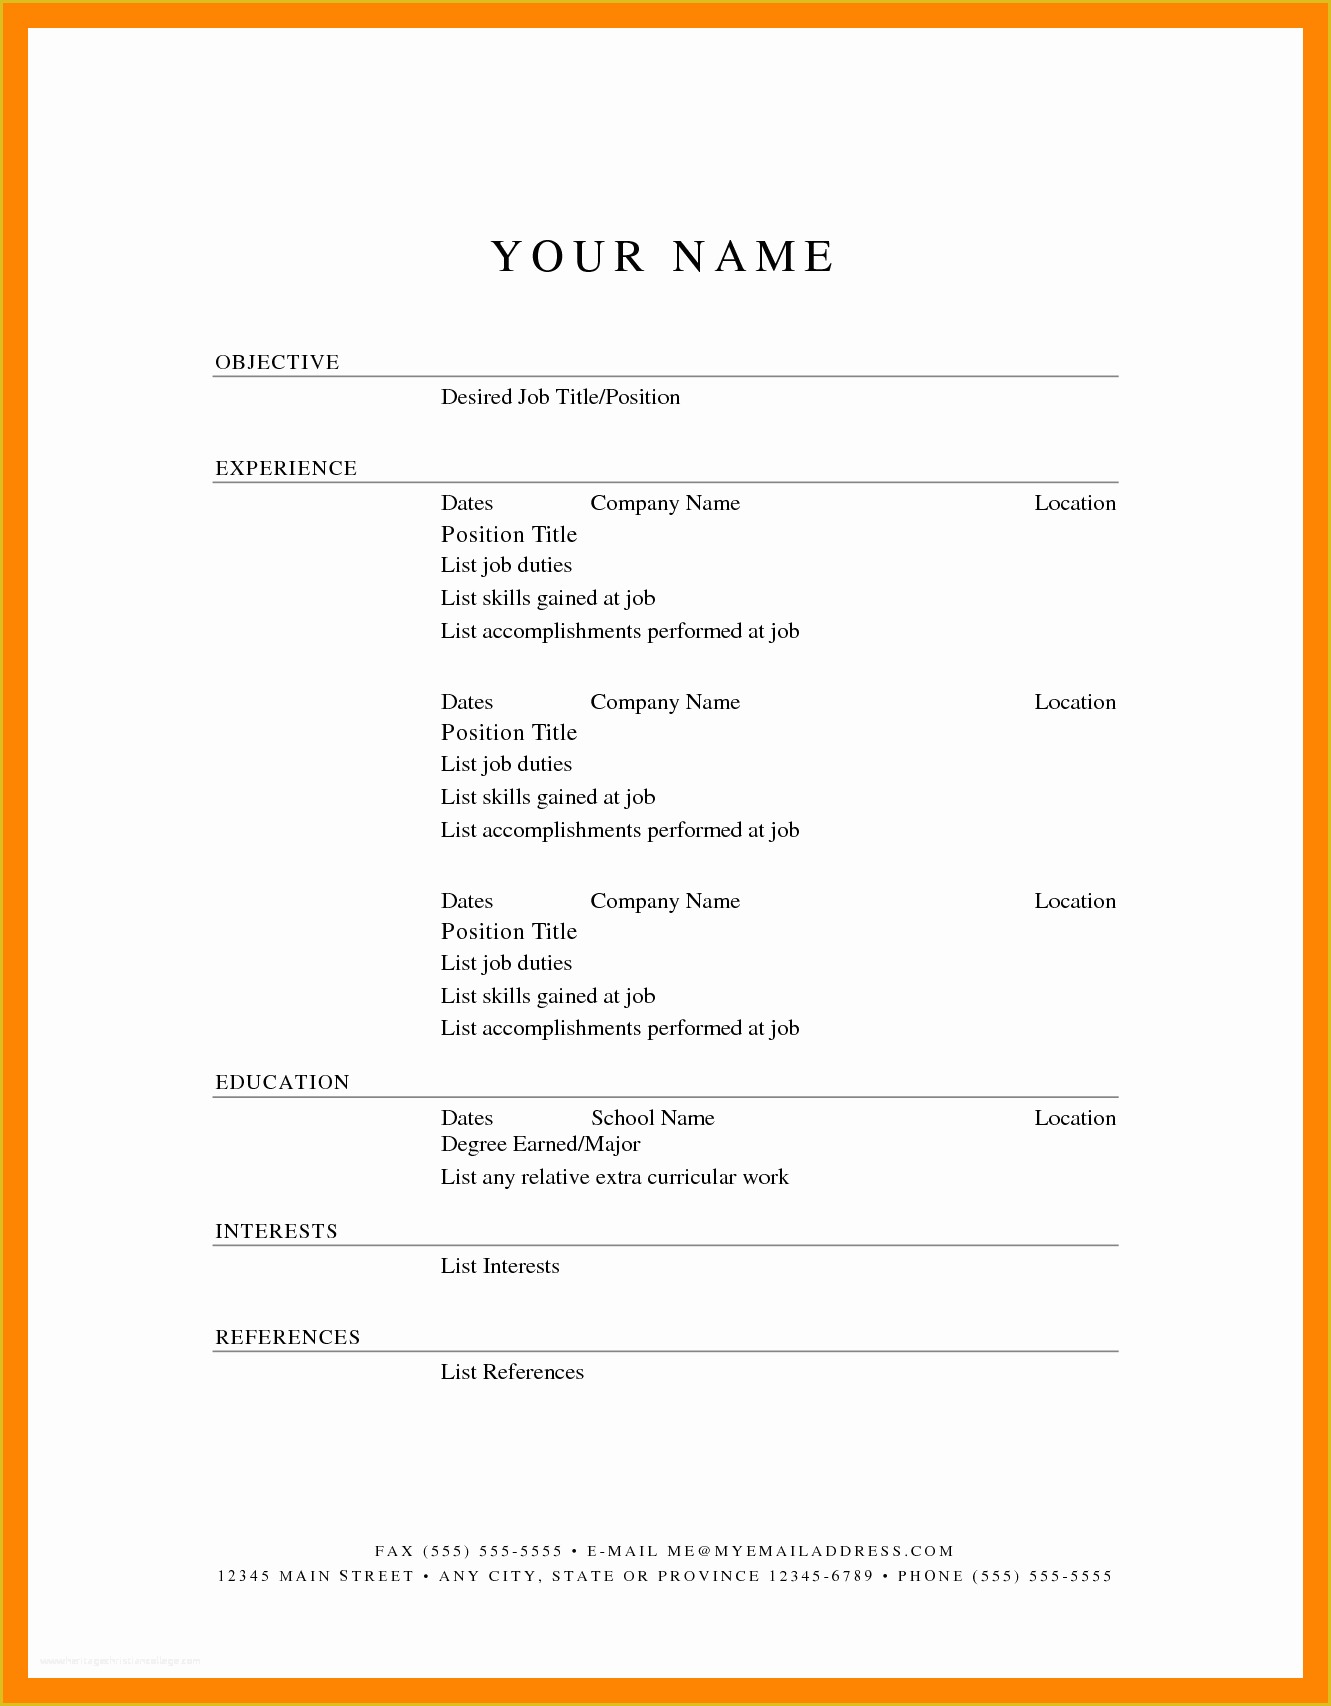 Free Printable Fill In the Blank Resume Templates Of 6 Free Printable Fill In the Blank Resume Templates